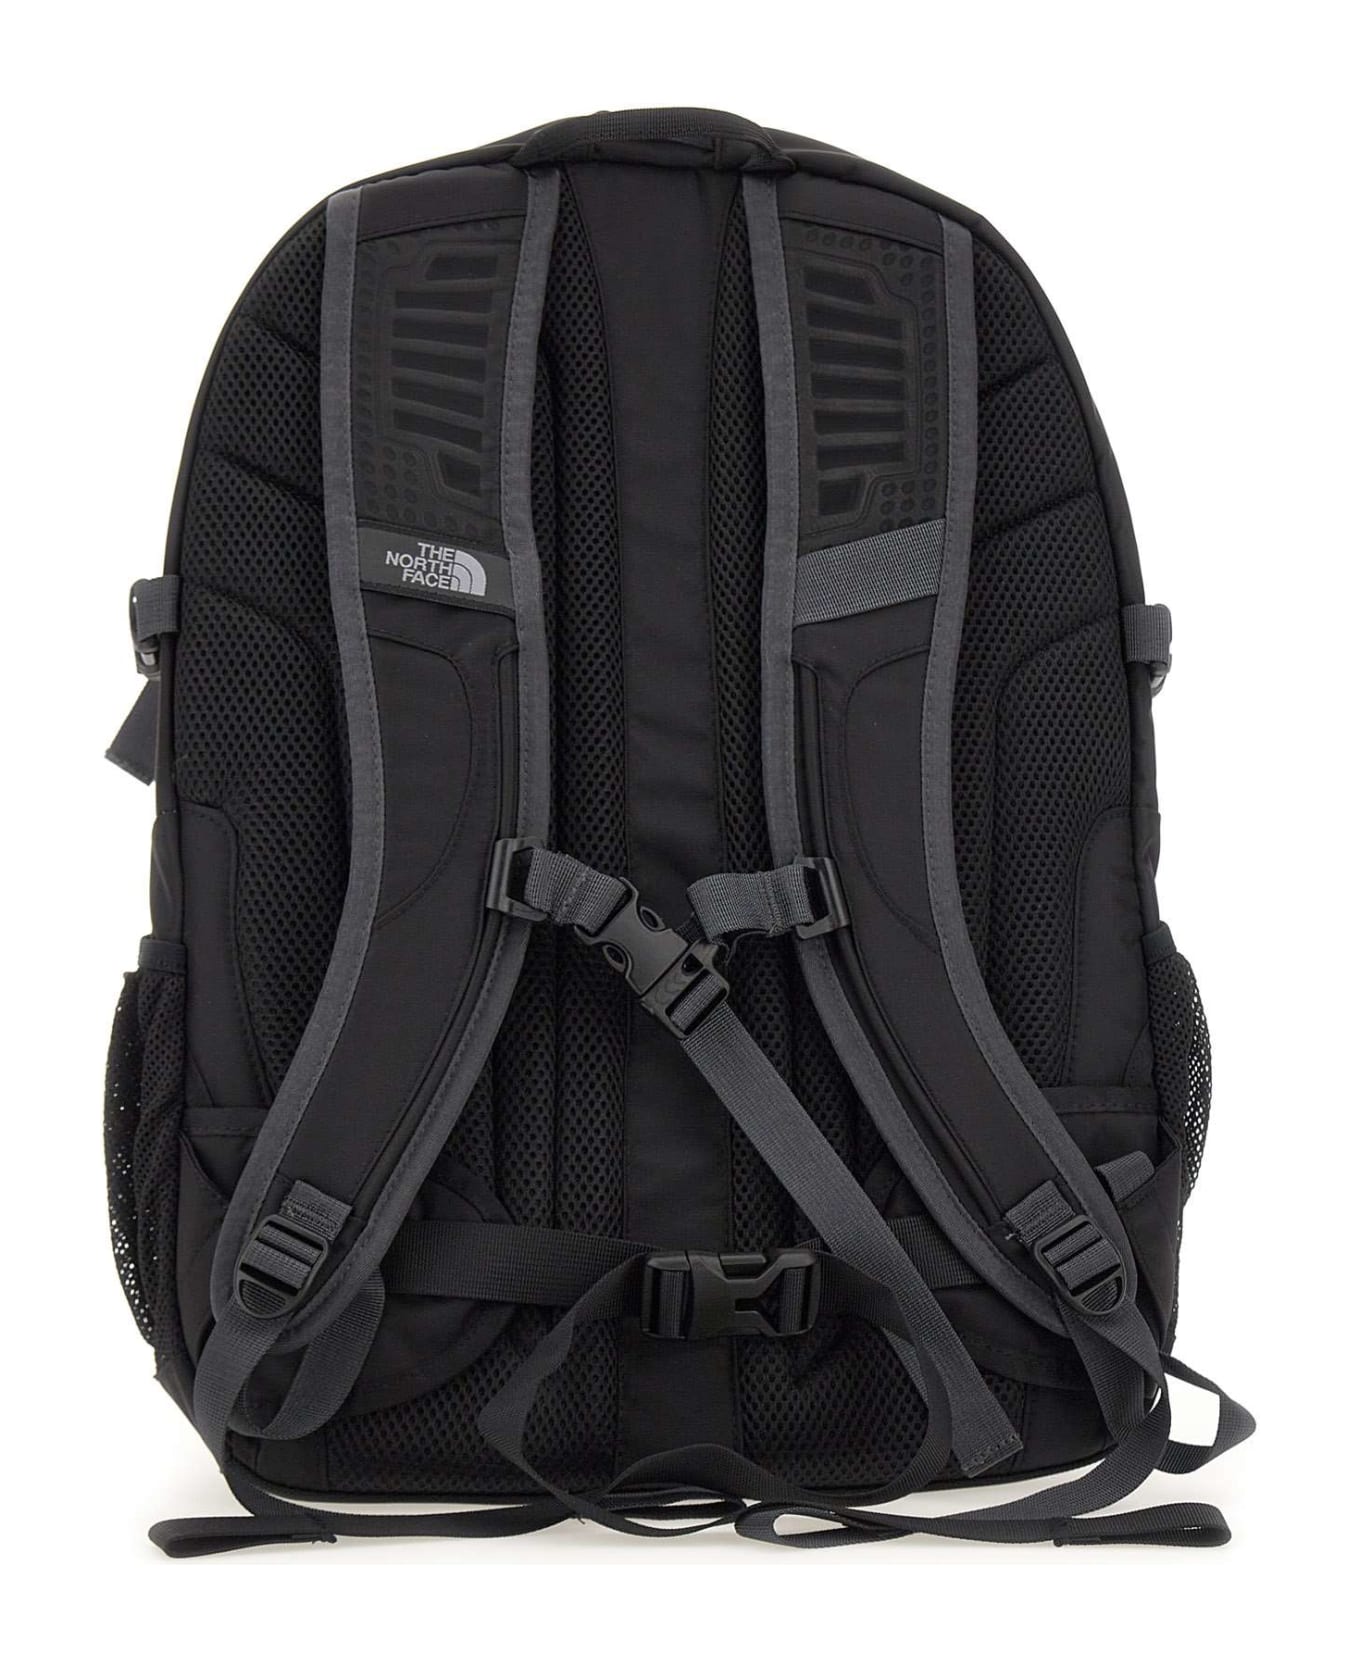 The North Face "borealis Classic" Backpack - BLACK バックパック